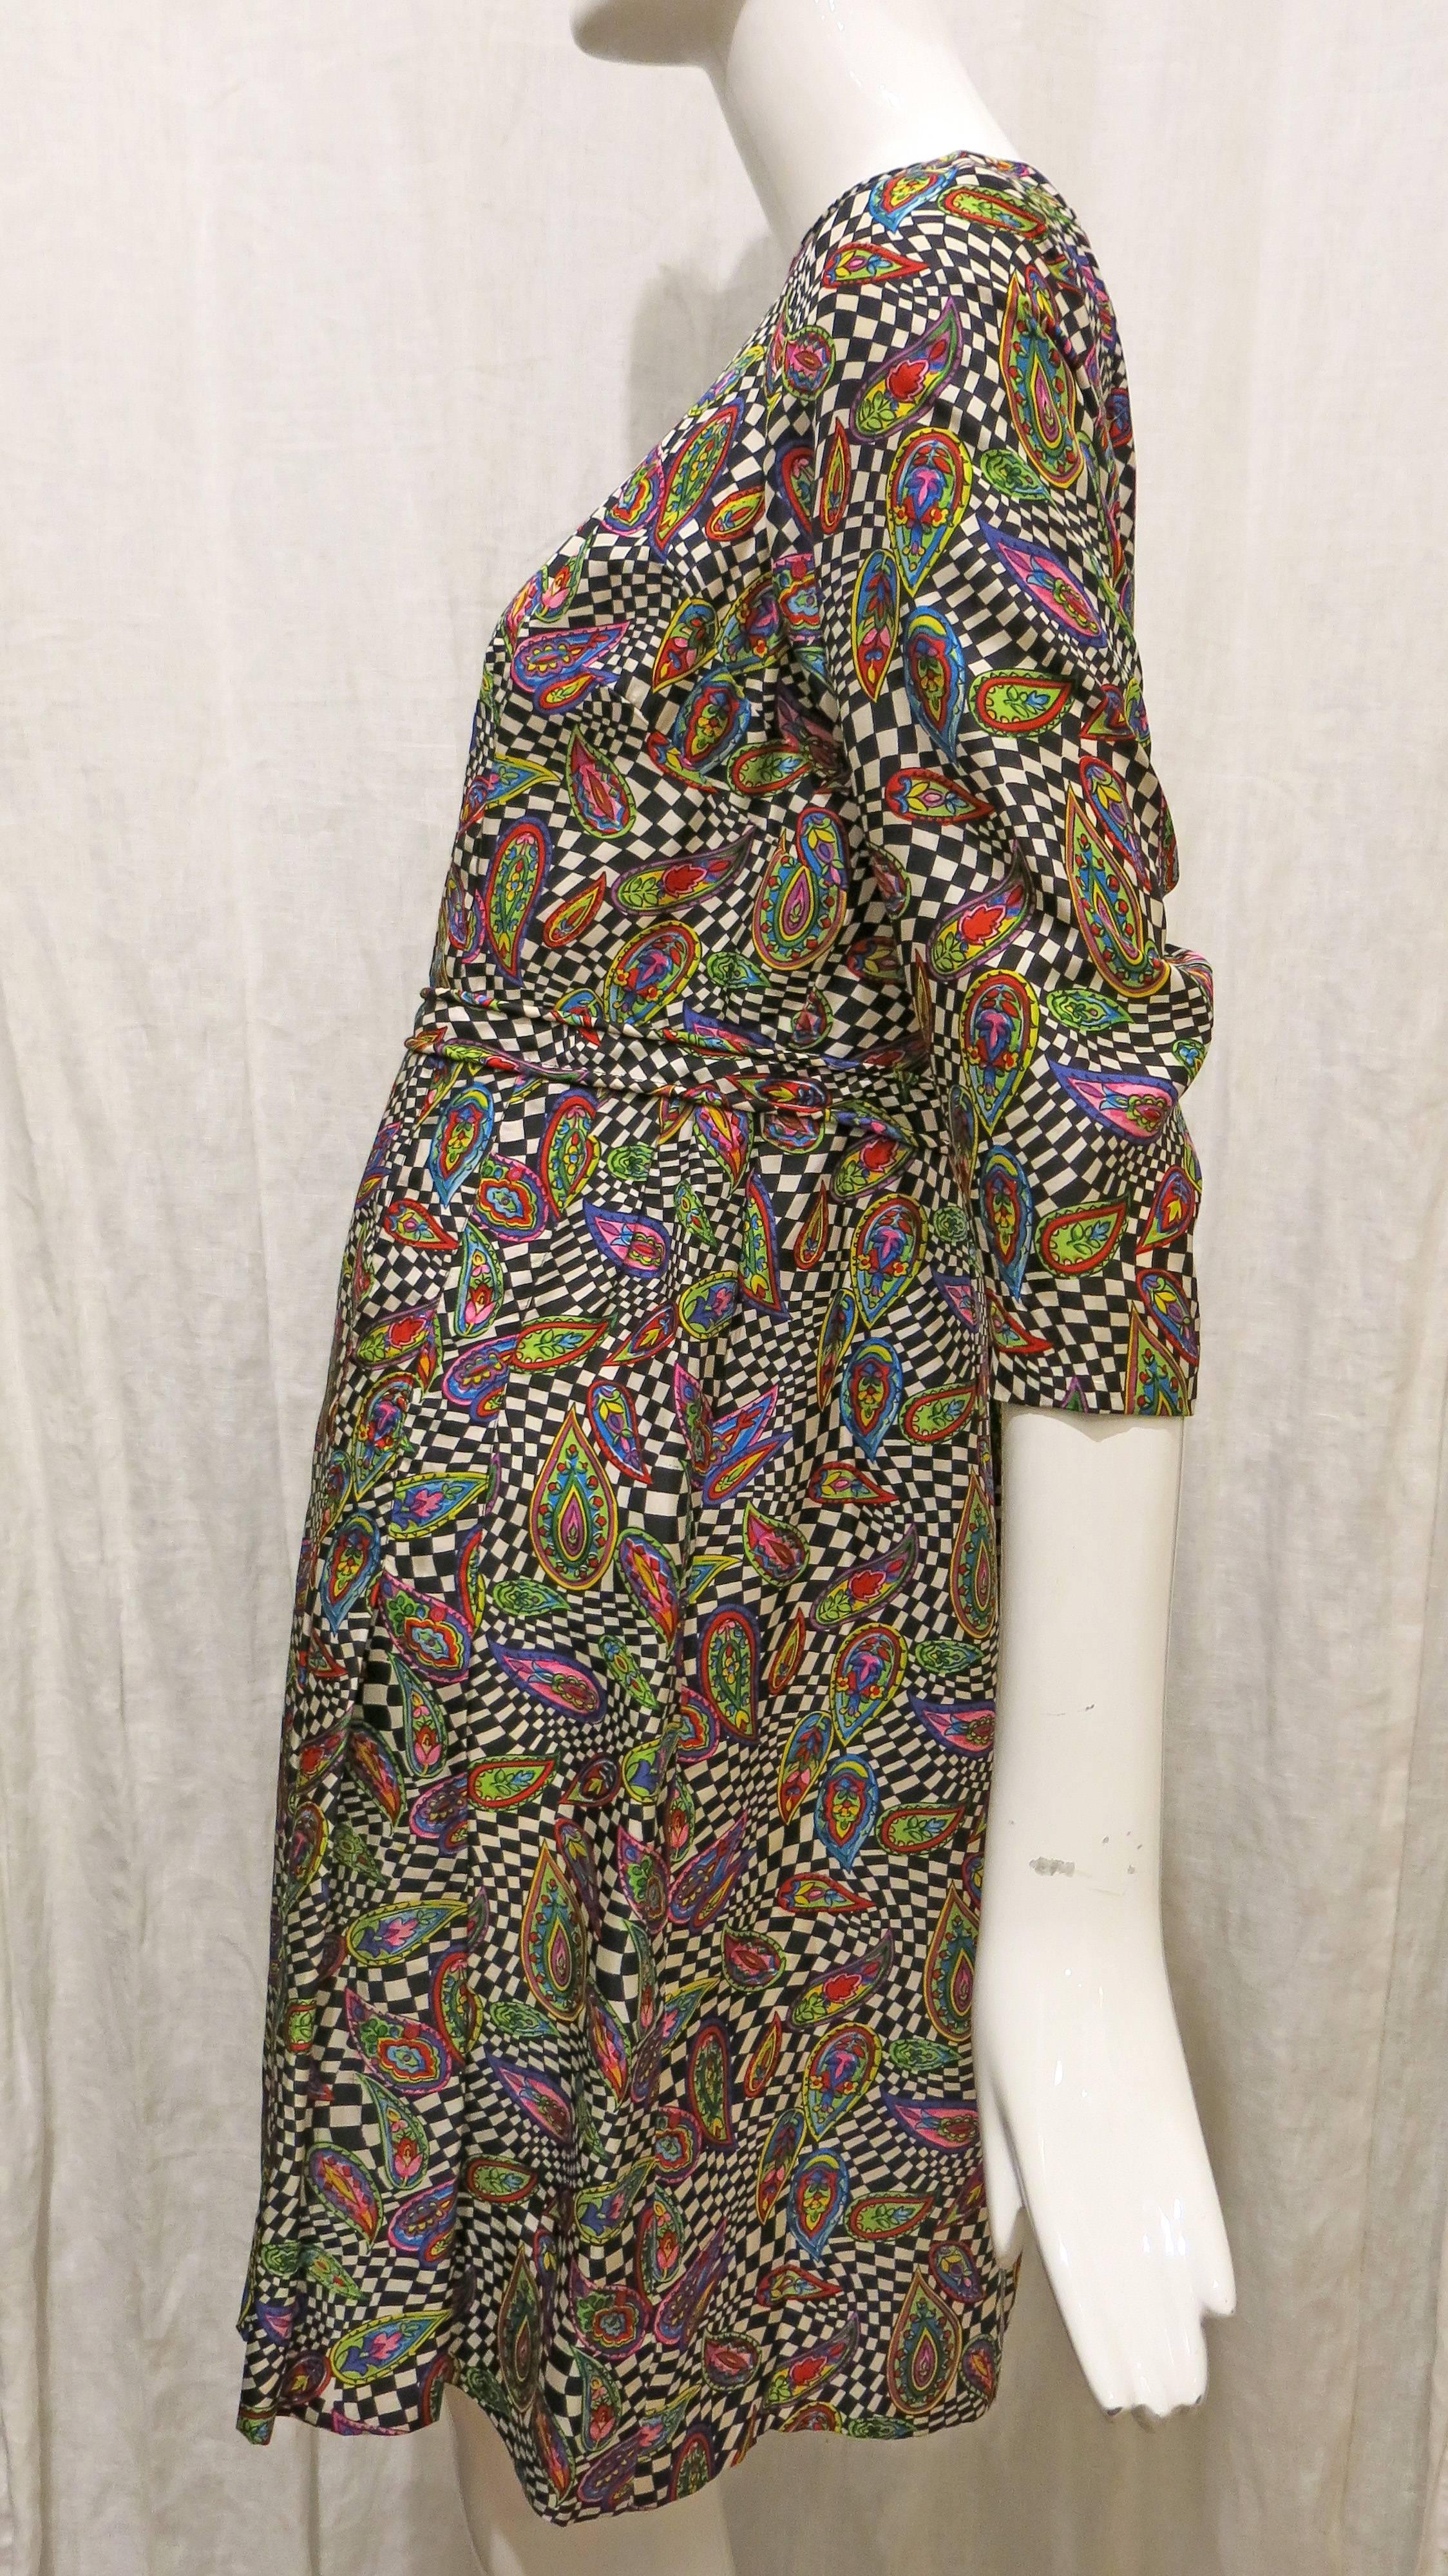 Psychedelic paisley and black and white check print handmade dress. Hem is handsewn. 3/4 length sleeves. Slight v at neckline. Pleated. 